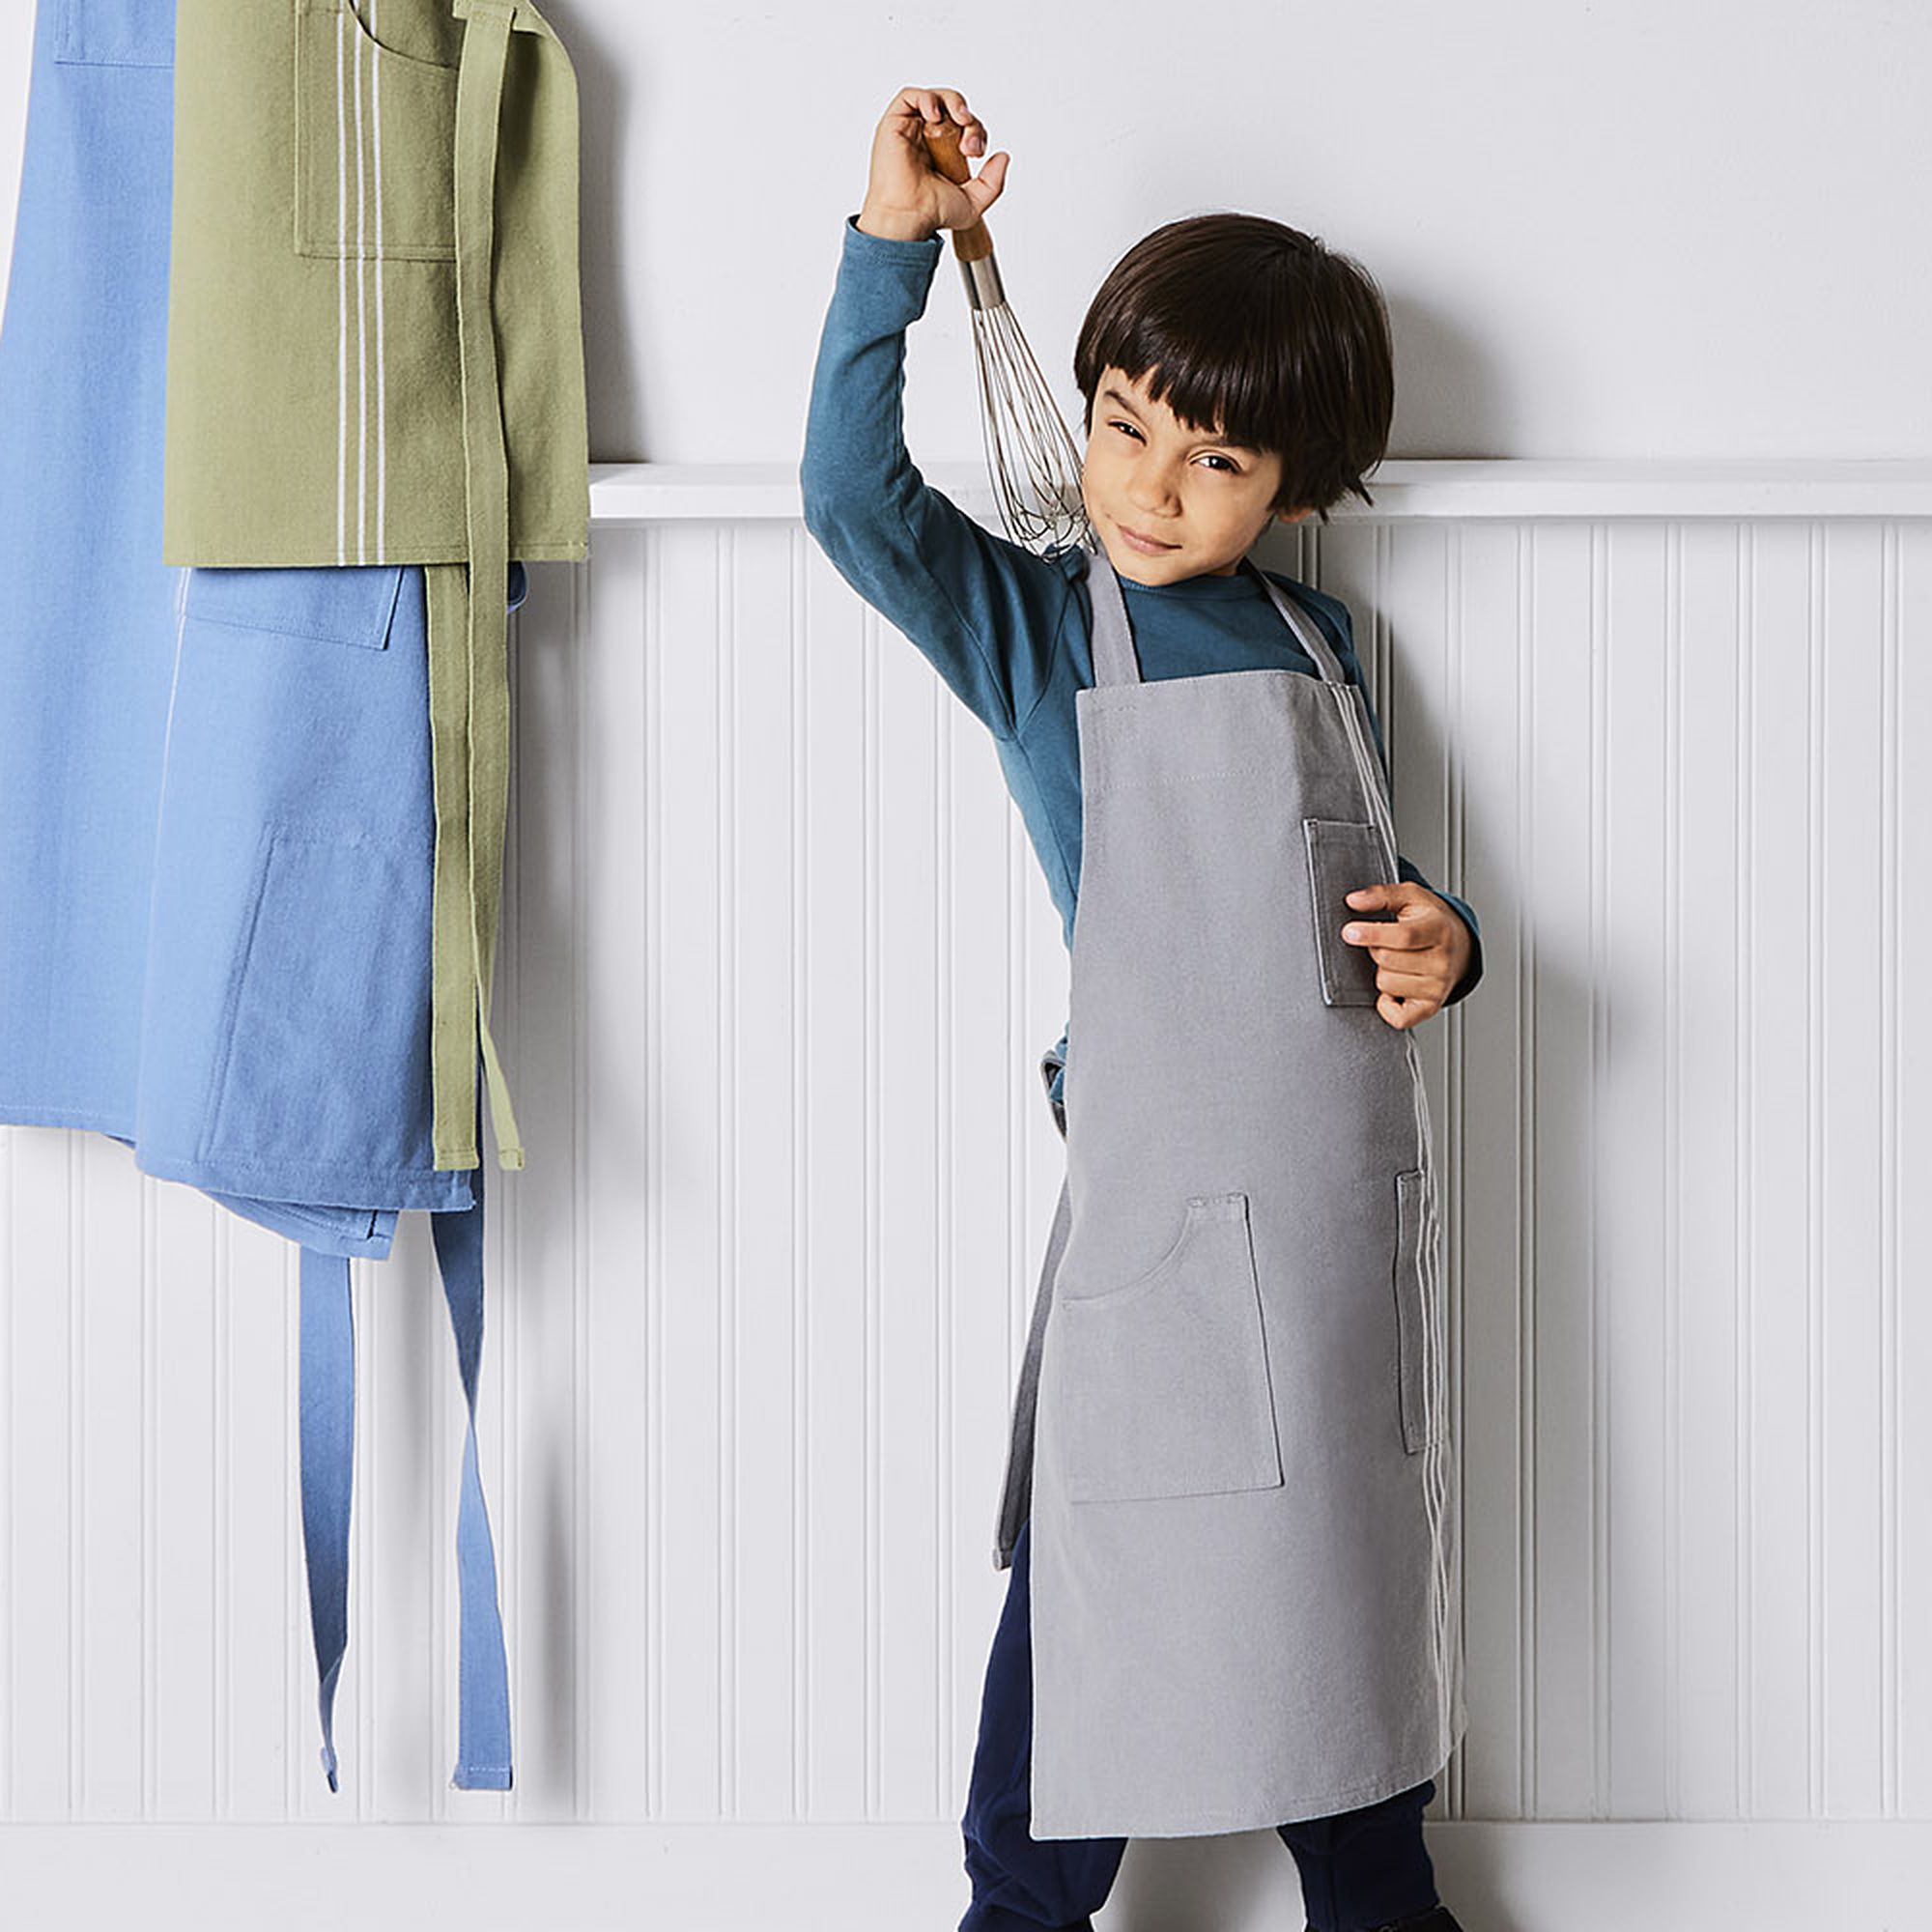 A young boy cheekily showing off a gray apron with a whisk in his hand. Aprons in rose, soft blue, and sage hang behind him on a wall.